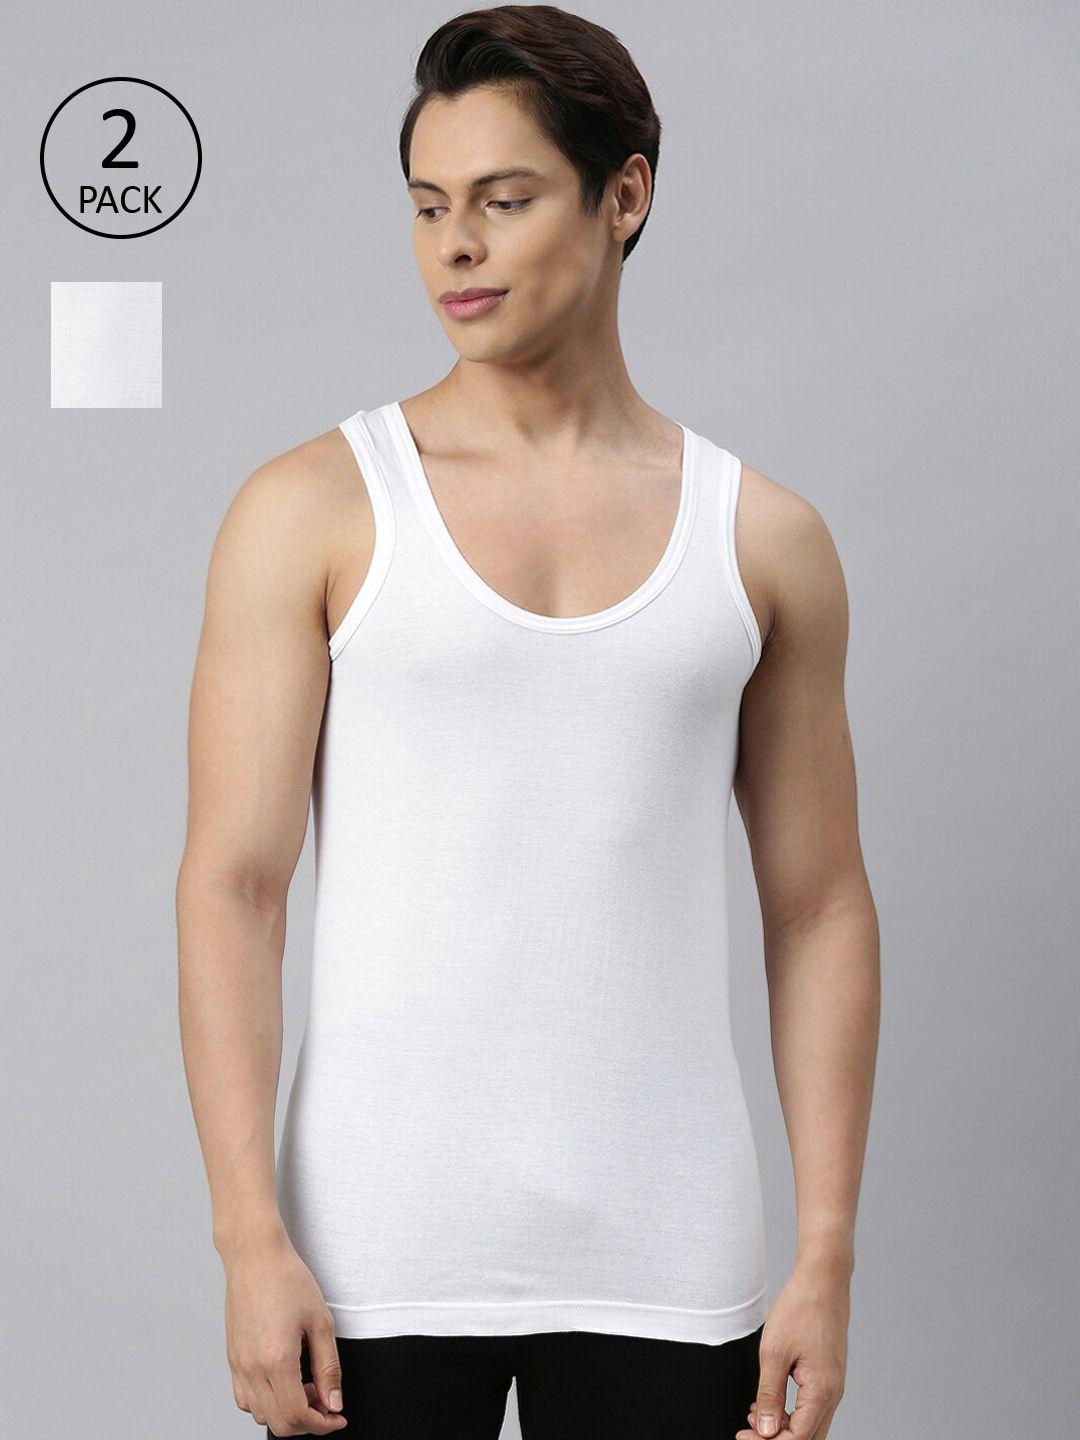 vip men pack of 2 white solid pure cotton innerwear vests